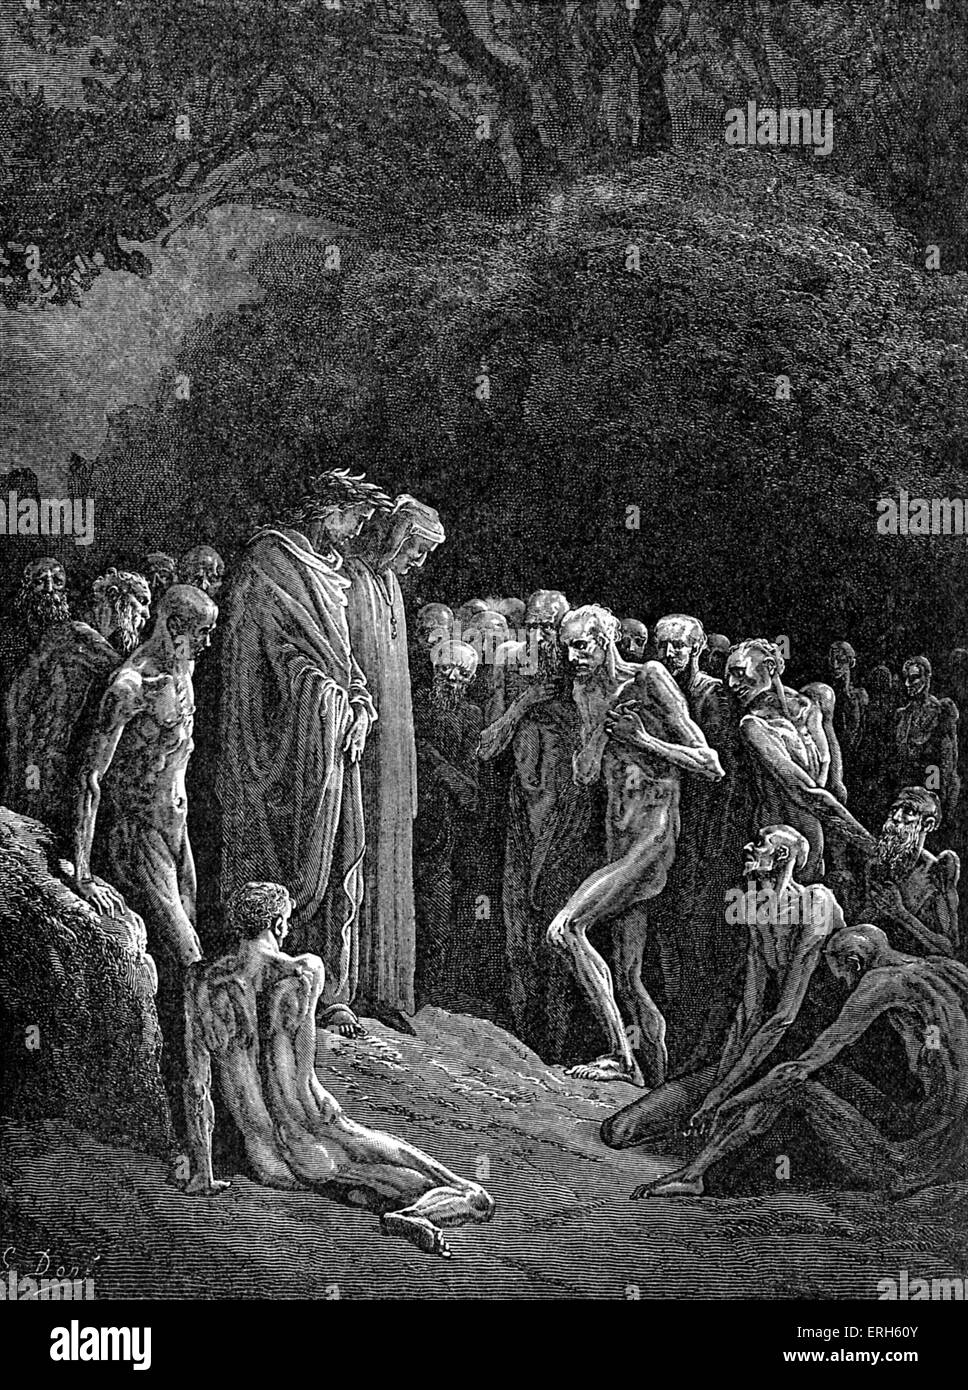 Dante's purgatory, part of his Divine Comedy. Illustration by Gustave Doré. Caption: 'The shadowy forms, that seem'd things dead and dead again, drew in at their deep-delved orbs rare wonder of me, perceiving I had life.' - Canto XXIV. Dante Alighieri: mid-May to mid-June 1265 - September 13/14, 1321. Stock Photo